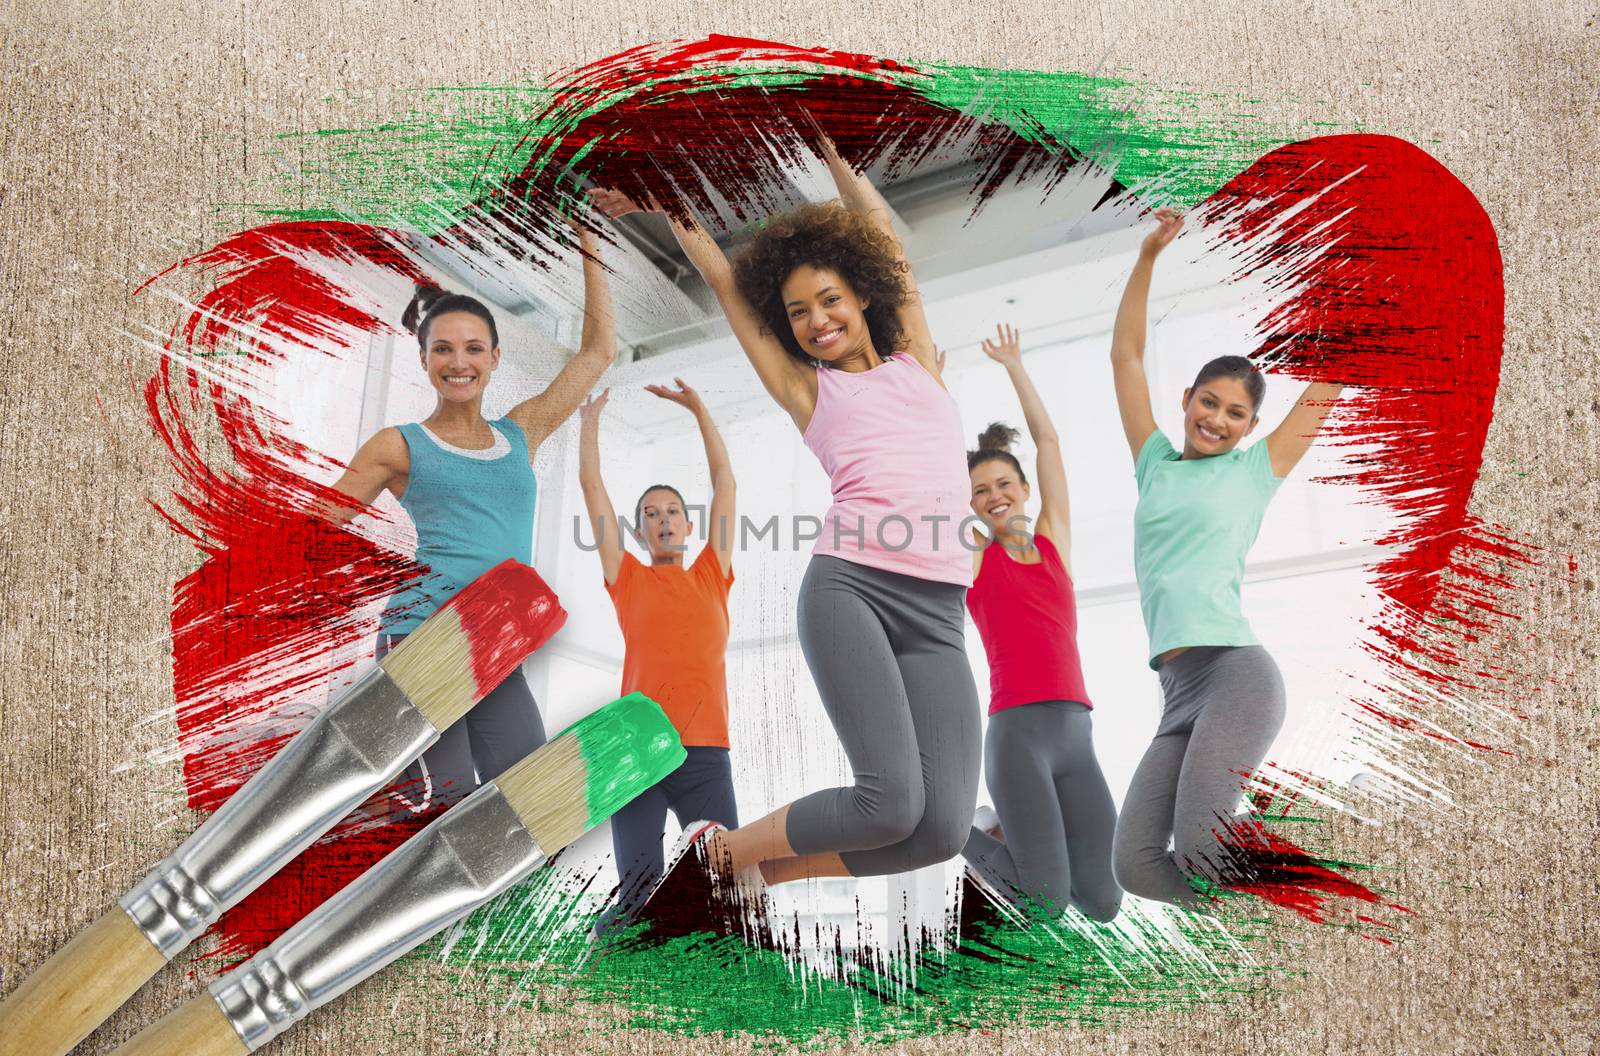 Composite image of fitness class at the gym by Wavebreakmedia